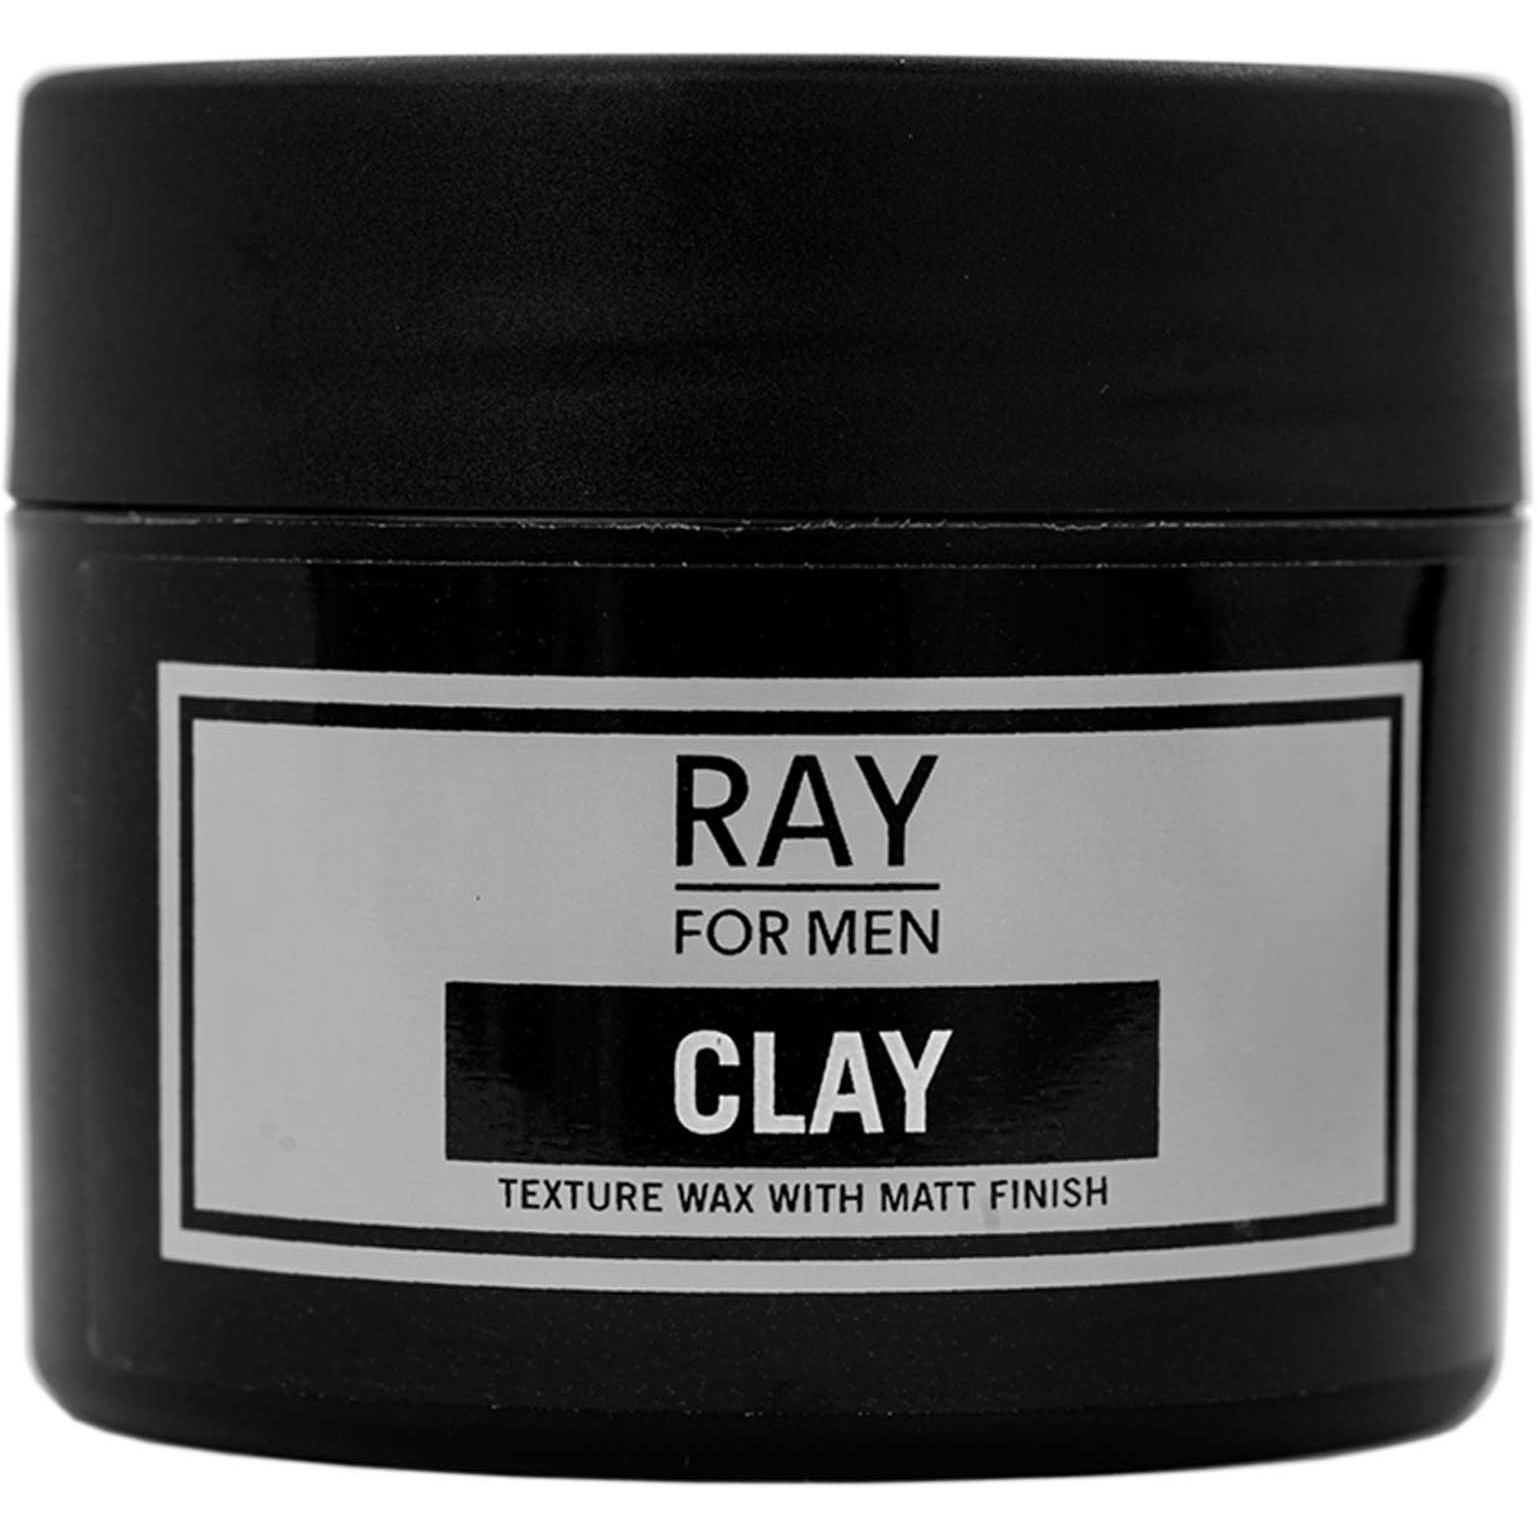 RAY FOR MEN